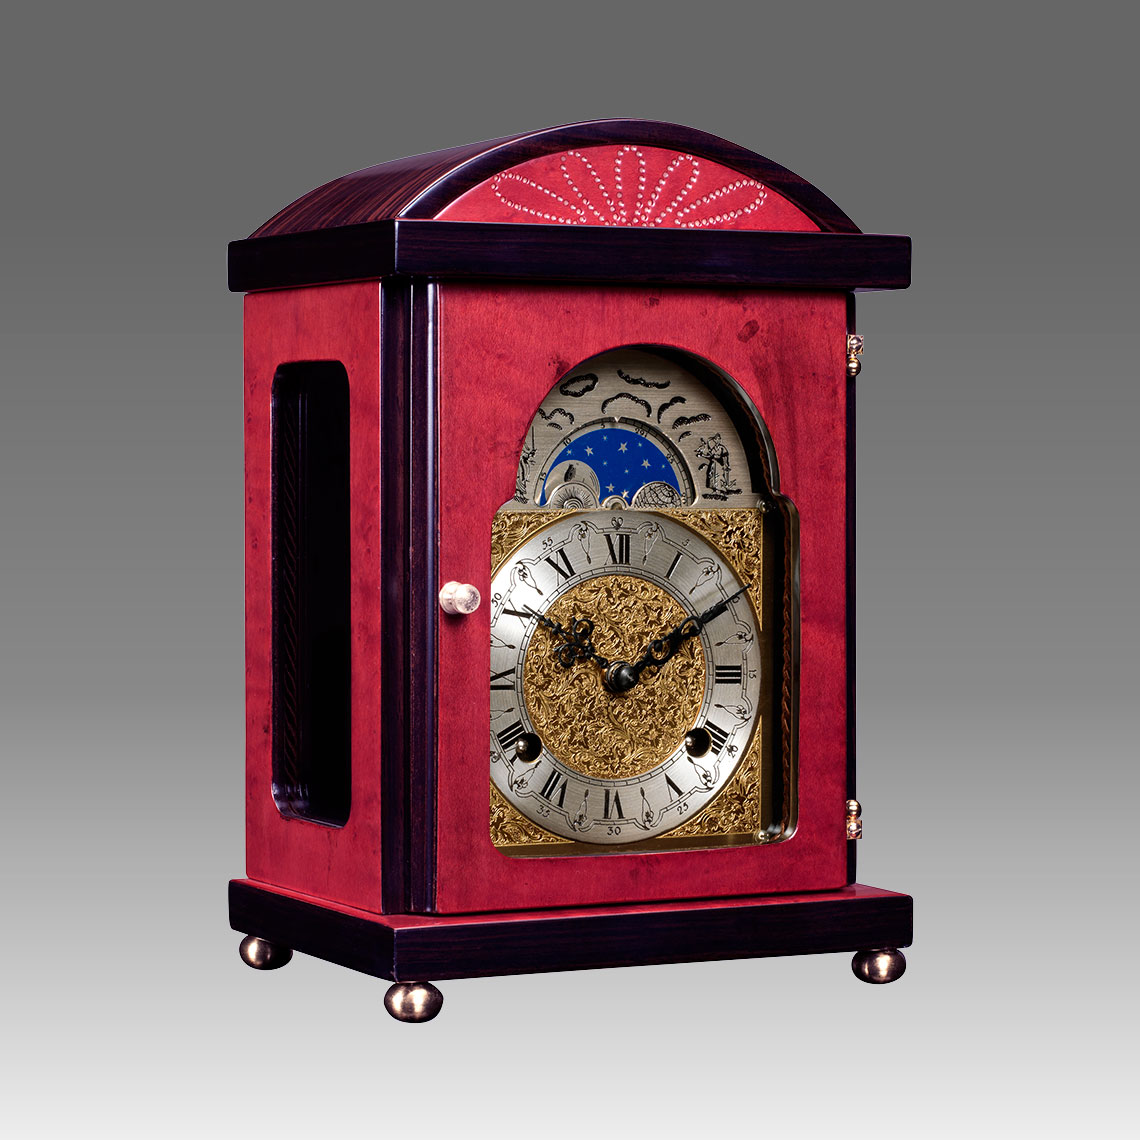 Mante Clock, Table Clock, Cimn Clock, Art.340/6 Erable red wood - Bim Bam melody on Bells, eatched decorated moon fase dial